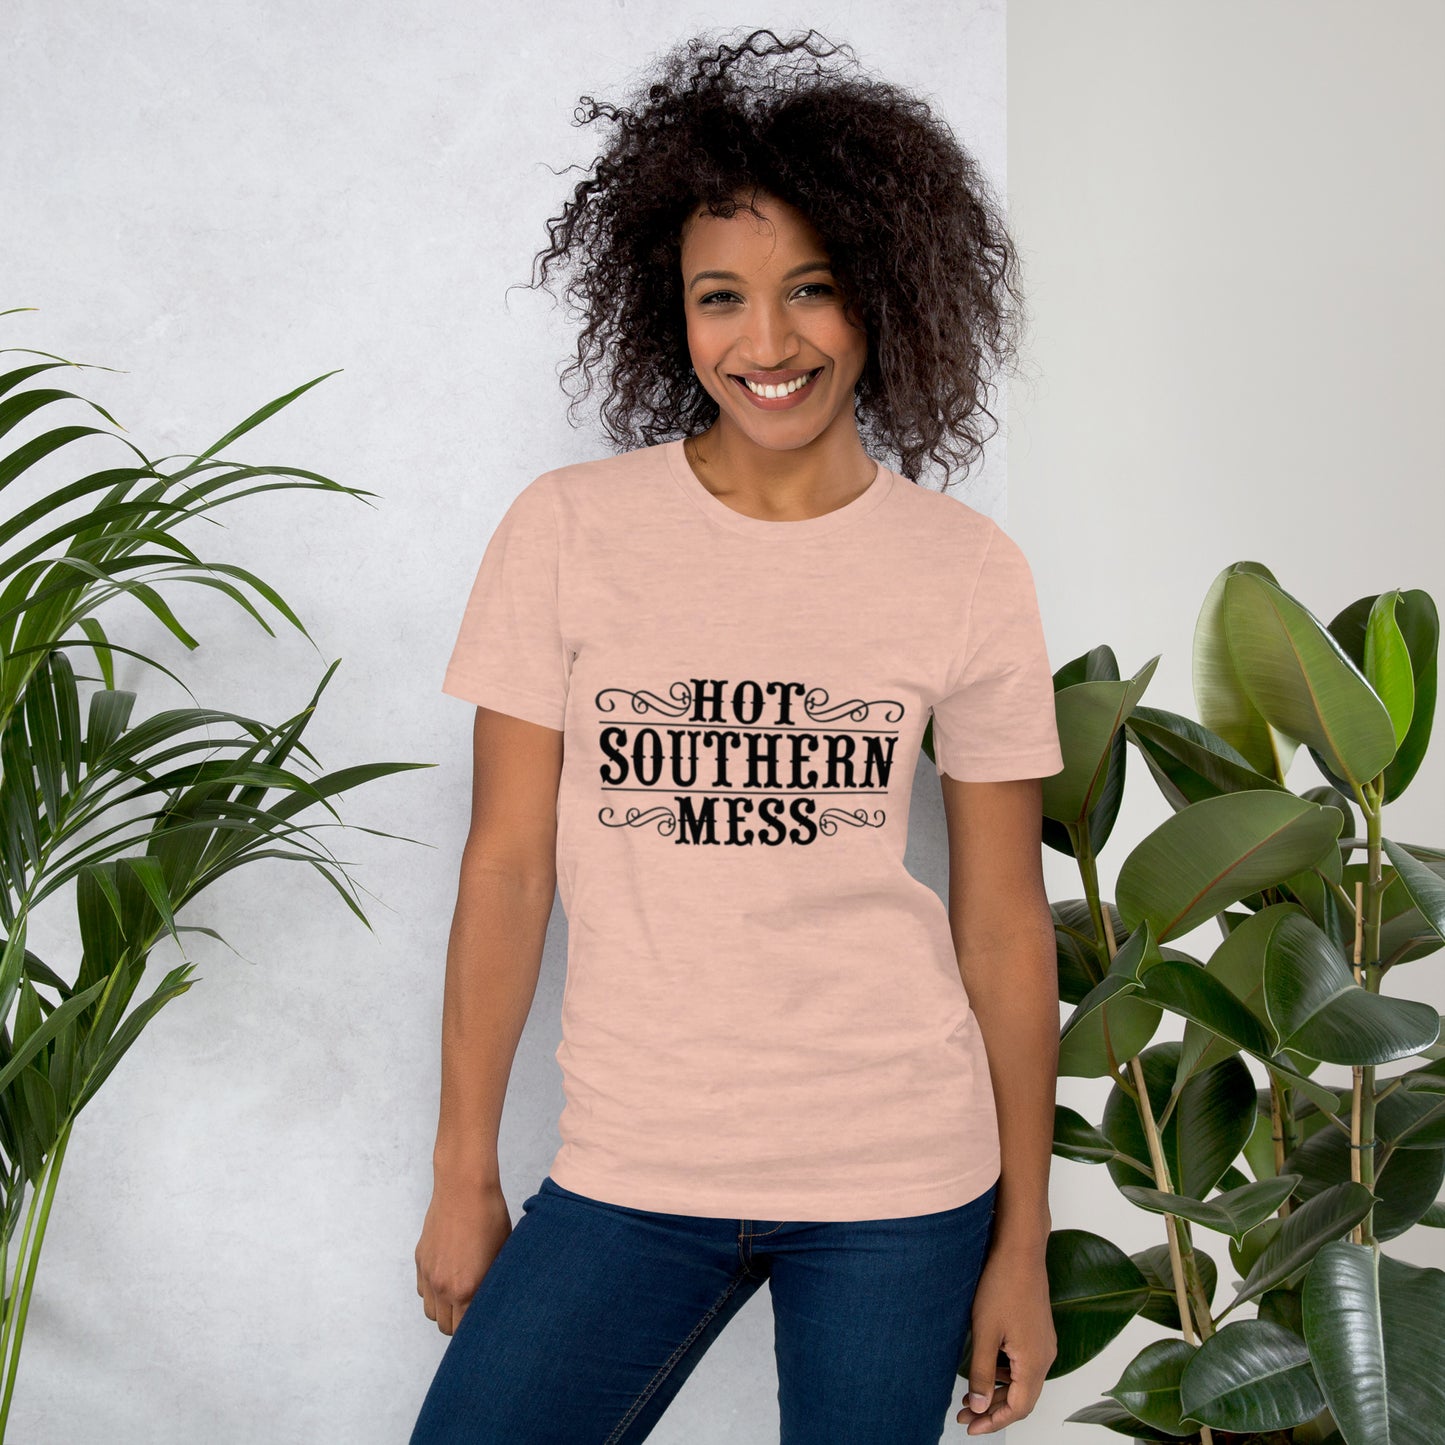 Southern Mess - Classic Country Tees